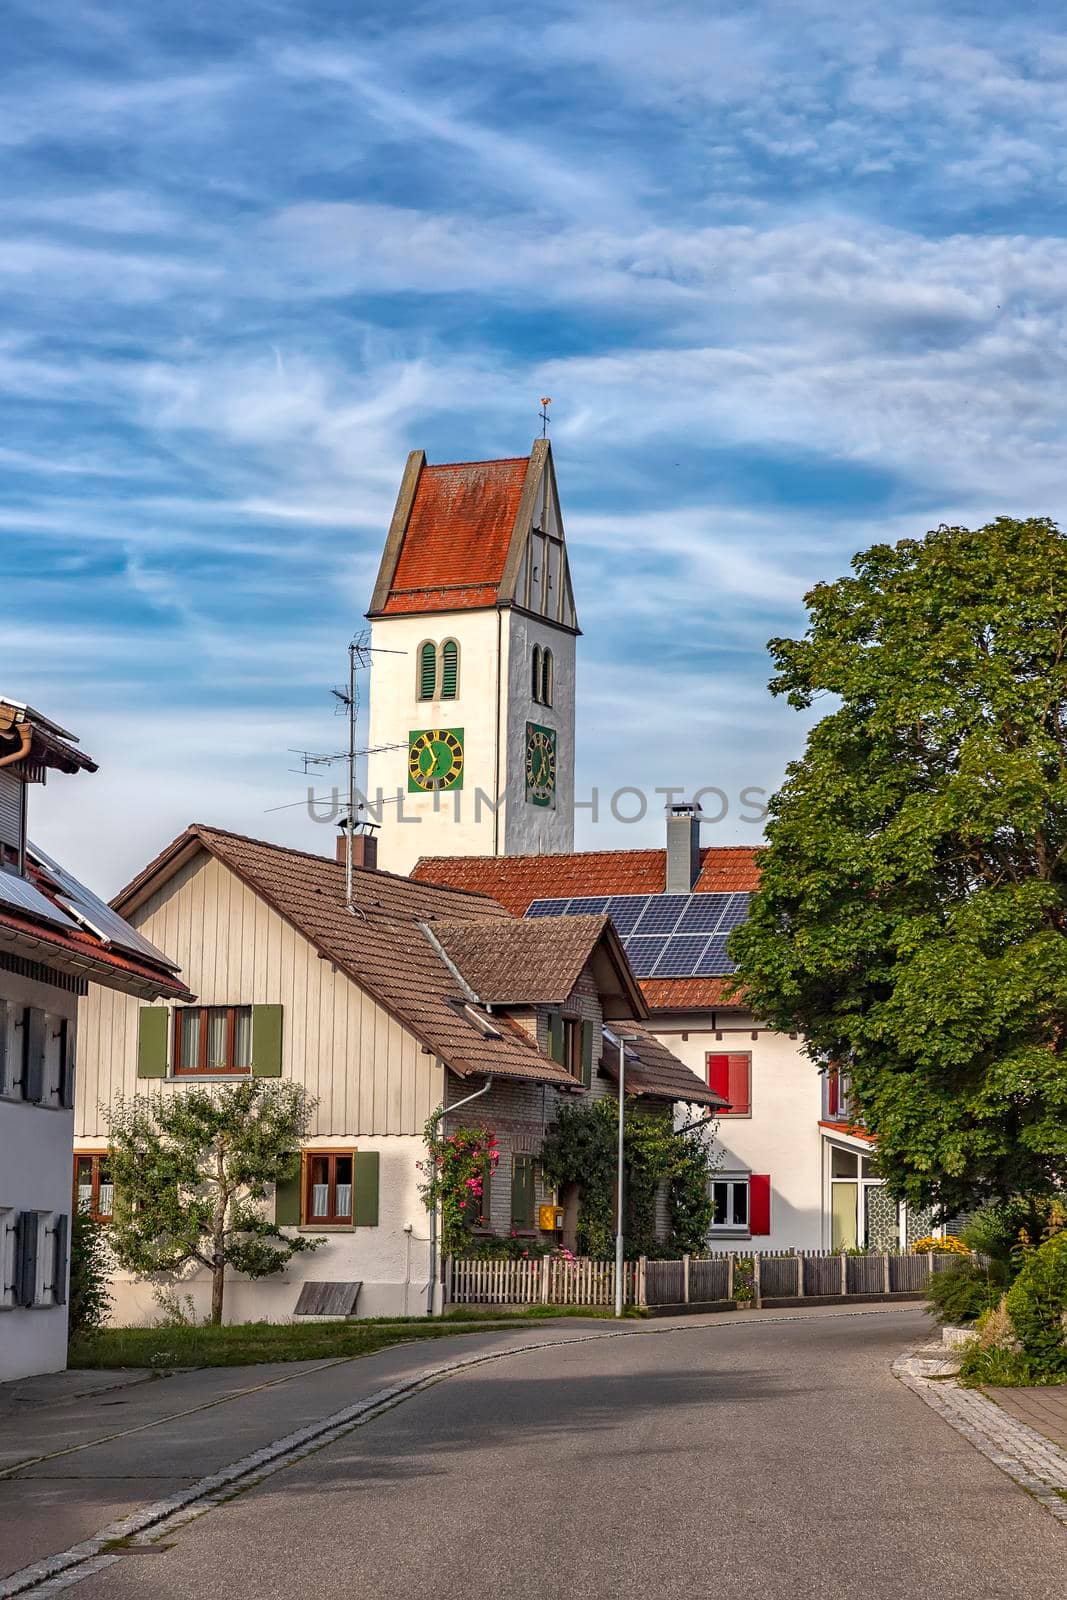 a small quiet street with houses and a clock tower in Leutkirch, Germany by EdVal